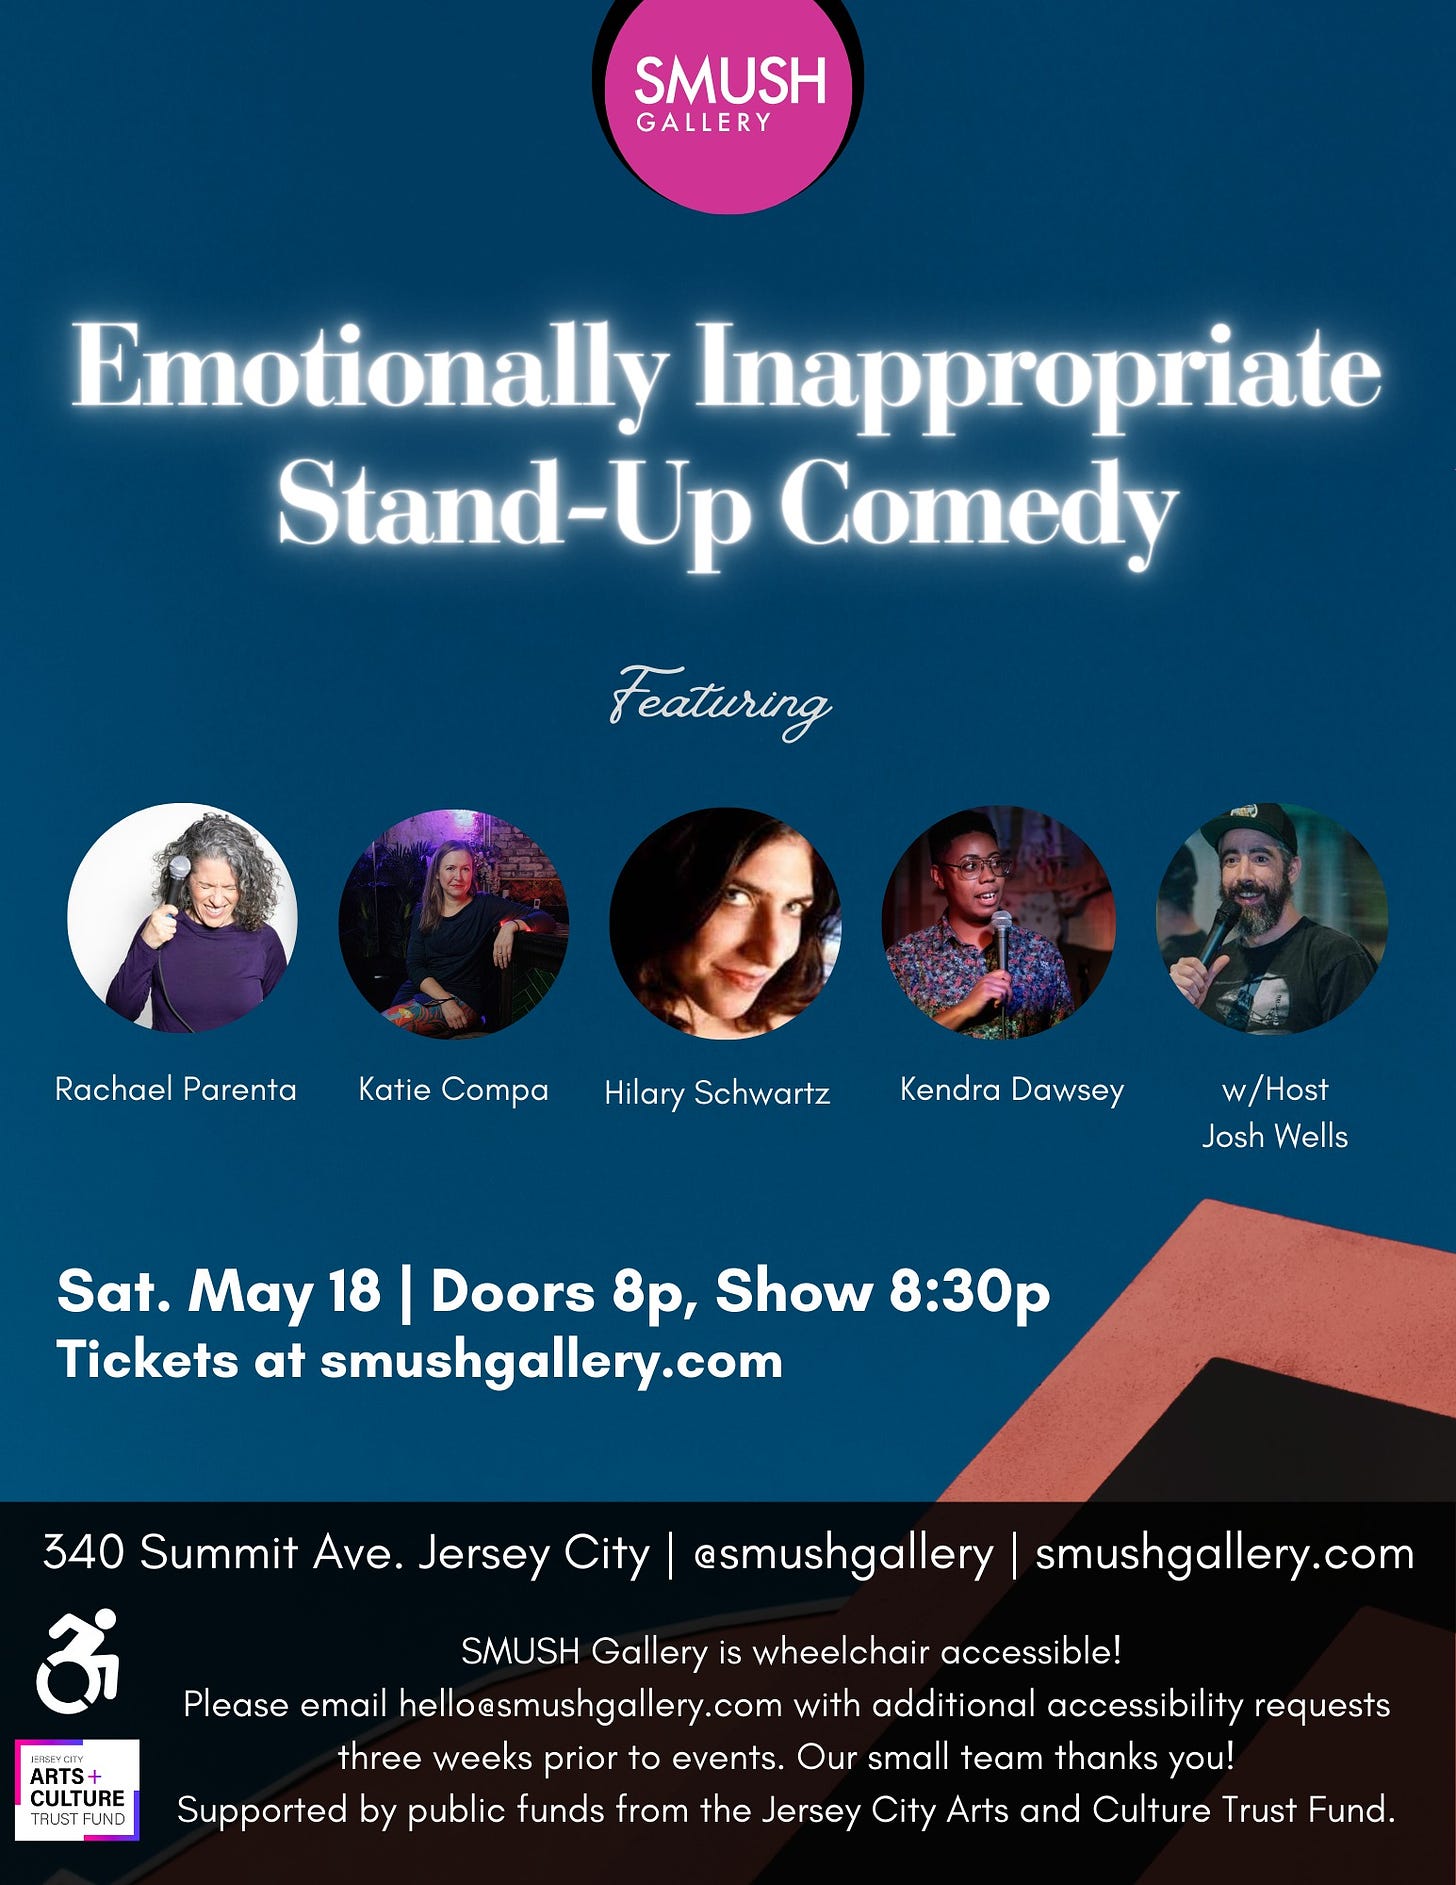 May be an image of 5 people and text that says 'SMUSH GALLERY Emotionally Inappropriate Stand-Up Comedy Featuring Rachael Parenta Katie Compa HilarSchwar Hilary Schwartz Kendra Dawsey w/Host Josh Wells Sat. May 18 Doors 8p, Show 8:30p Tickets at smushgallery.com 340 Summit Ave. Jersey City @smushgallery ARTS+ CULTURE FUD smushgallery.com SMUSH Gallery is wheelchair accessible! Please email hello@smushgallery.com with additional accessibility requests three weeks prior to events. Our small team thanks you! Supported by public funds from the Jersey City Arts and Iture Trust Fund.'